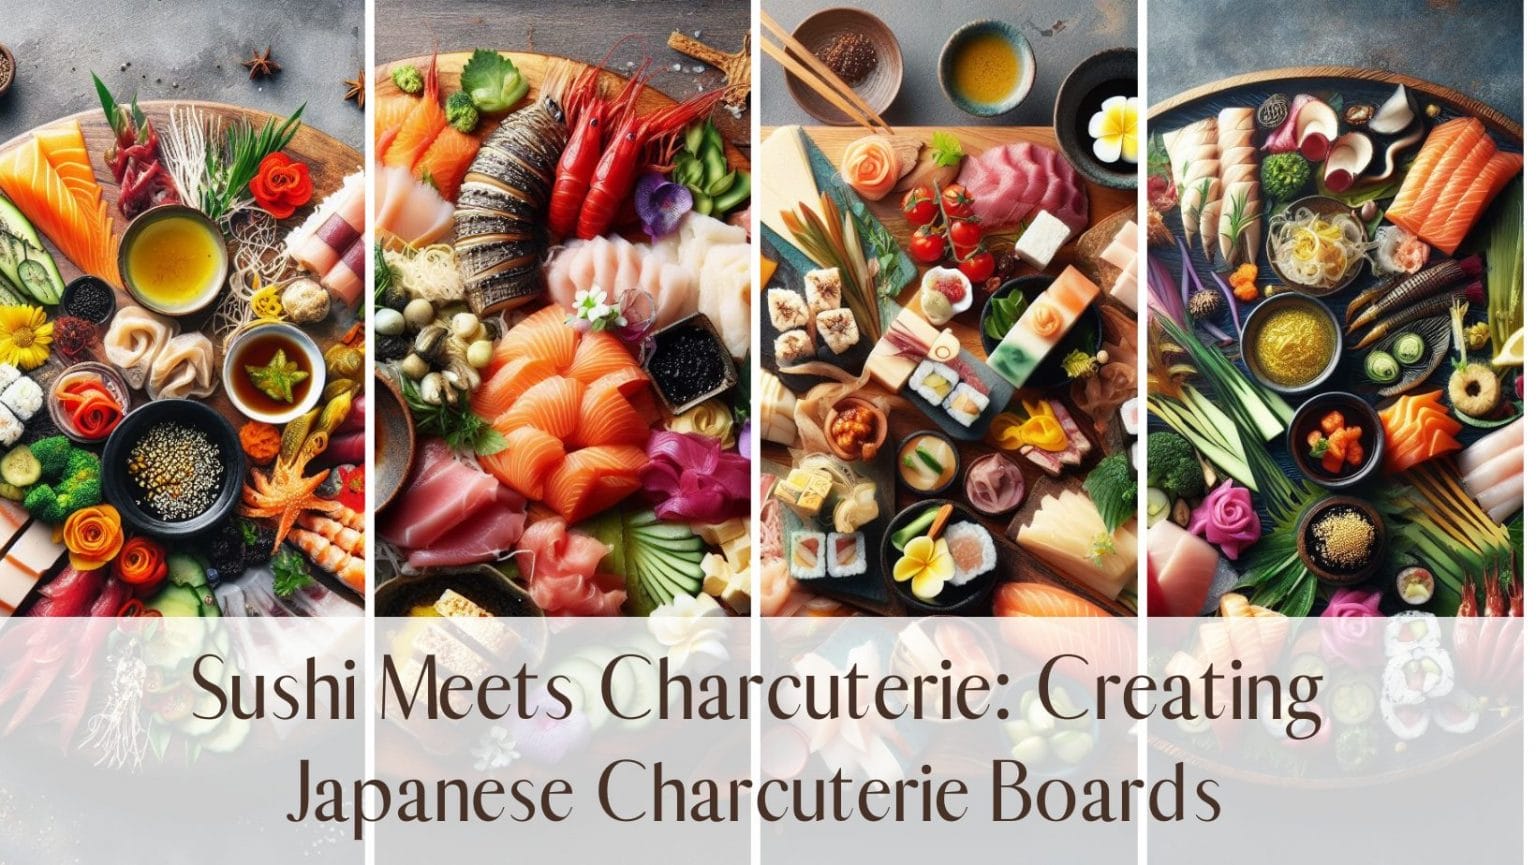 Sushi Meets Charcuterie: Creating Japanese Charcuterie Boards